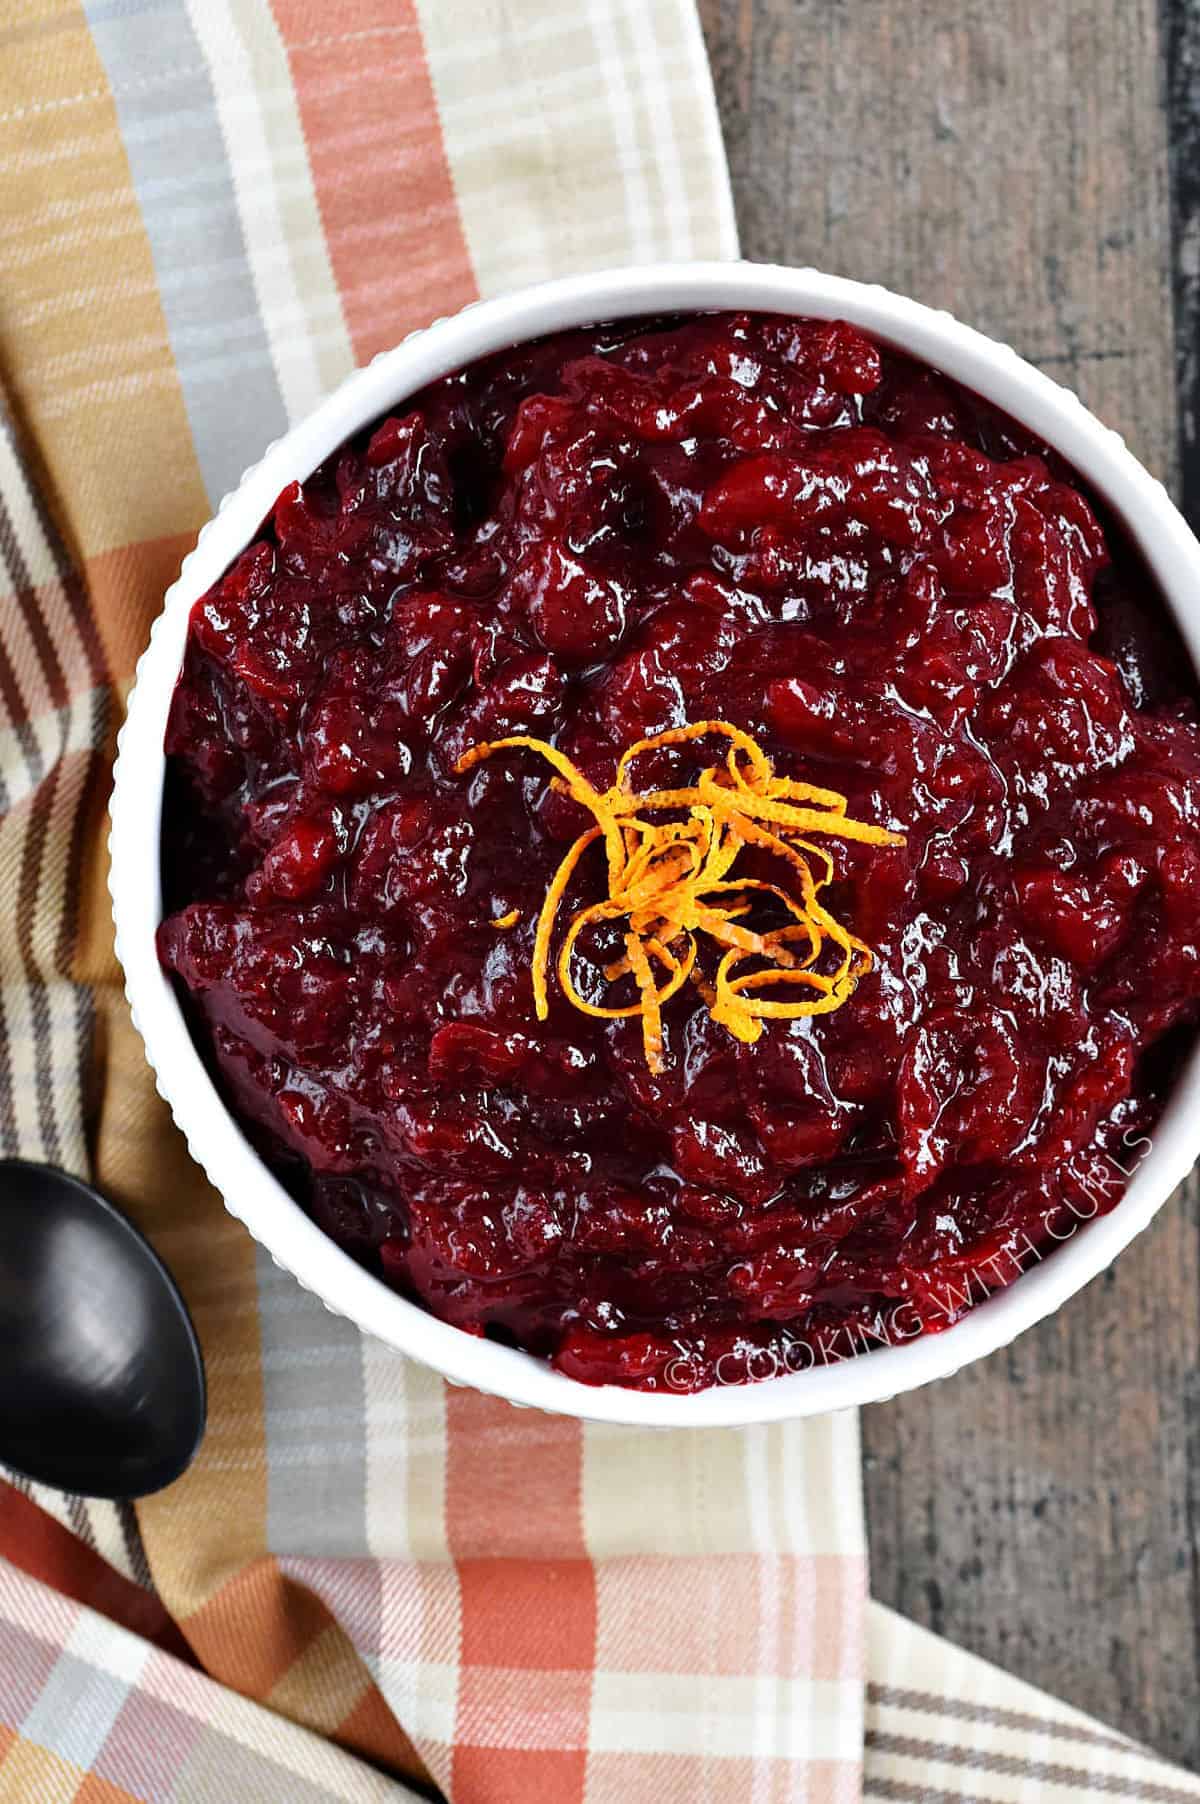 Looking down on a bowl of tart Orange Amaretto Cranberry Sauce sitting on a plaid, fall-colored napkin.